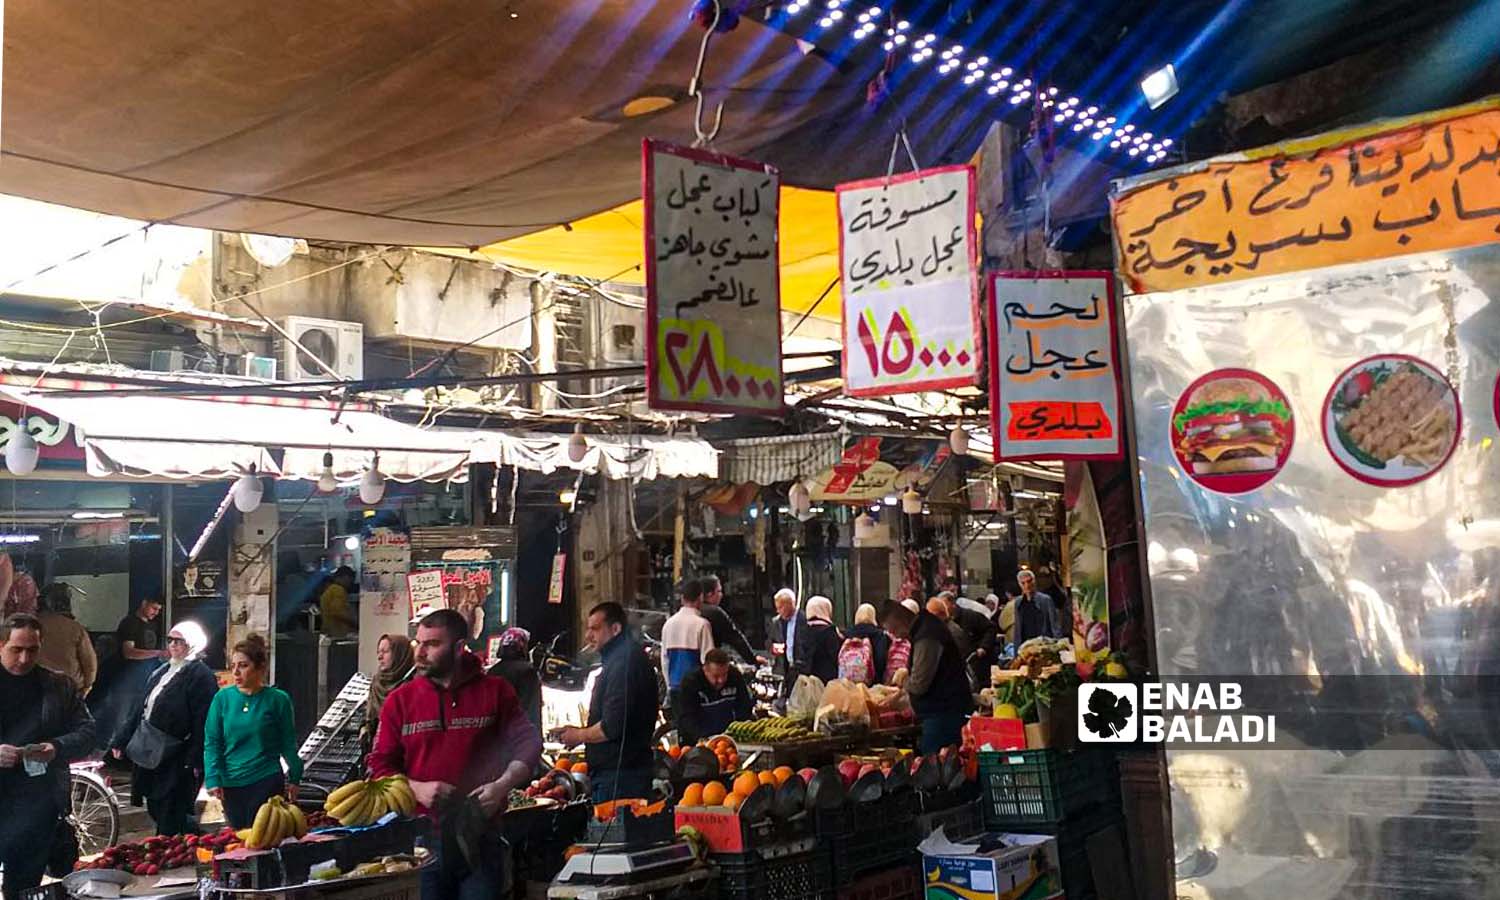 A virtual tour in Bab Sraijeh street market in the Syrian capital of Damascus - 30 March 2022 (Enab Baladi/Hassan Hassan)
